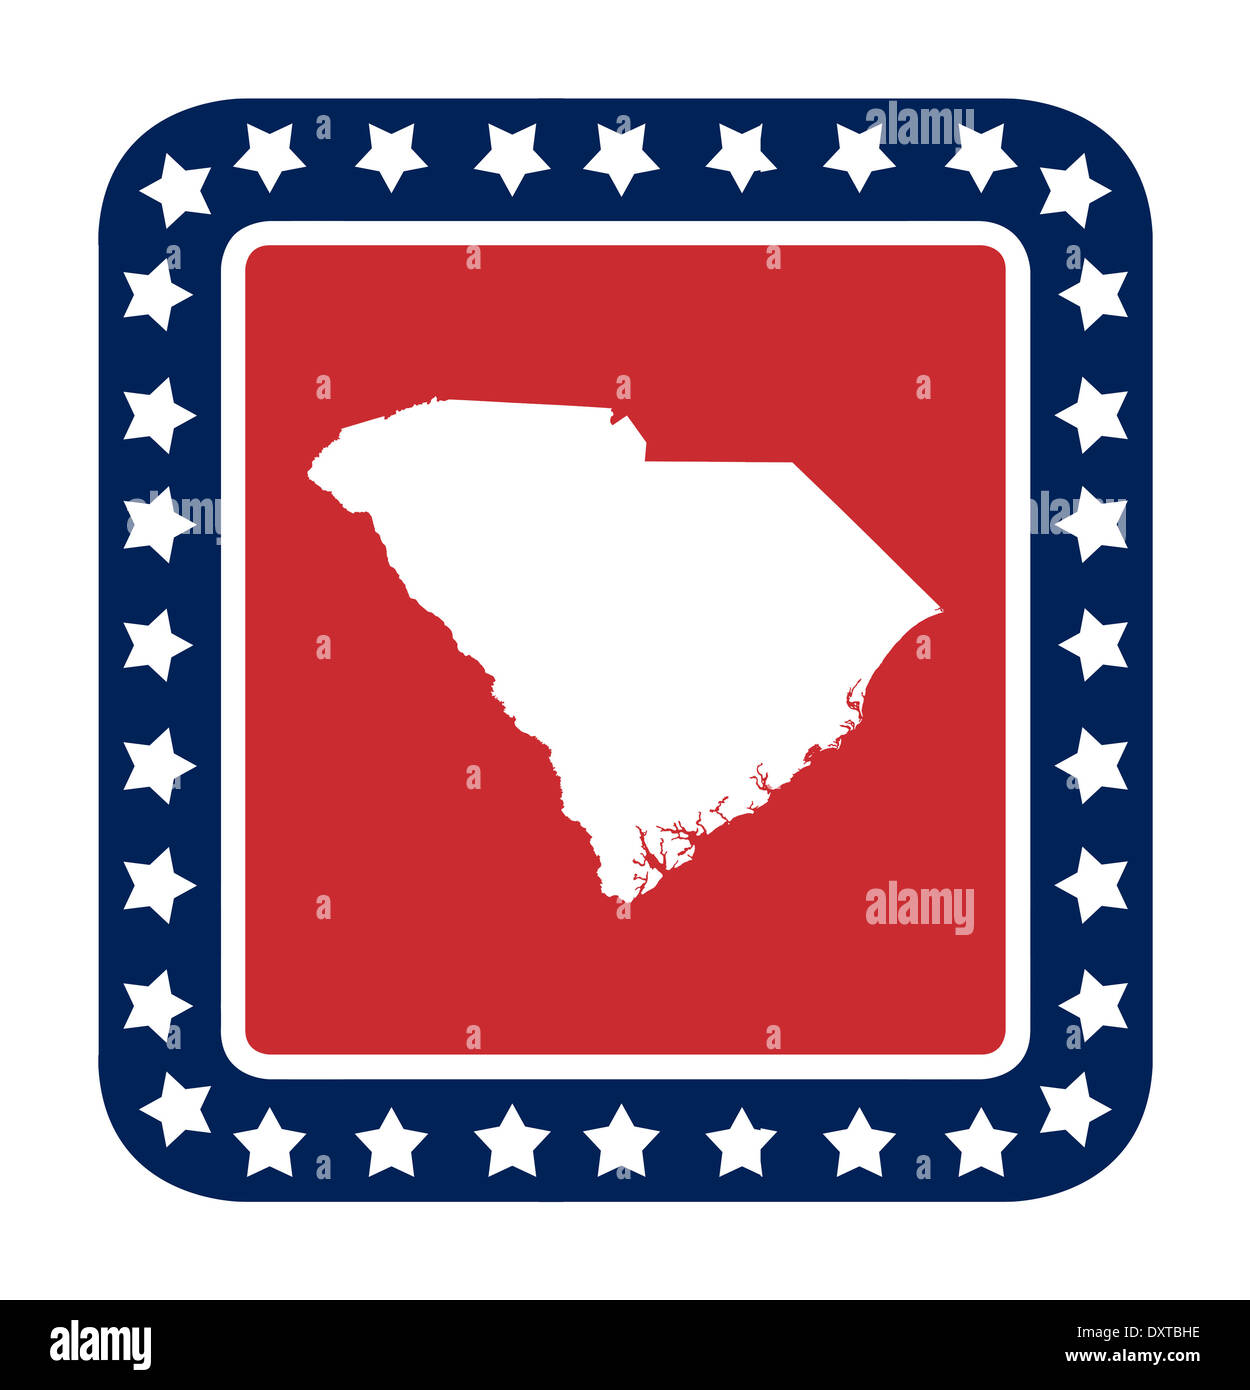 South Carolina state button on American flag in flat web design style, isolated on white background. Stock Photo